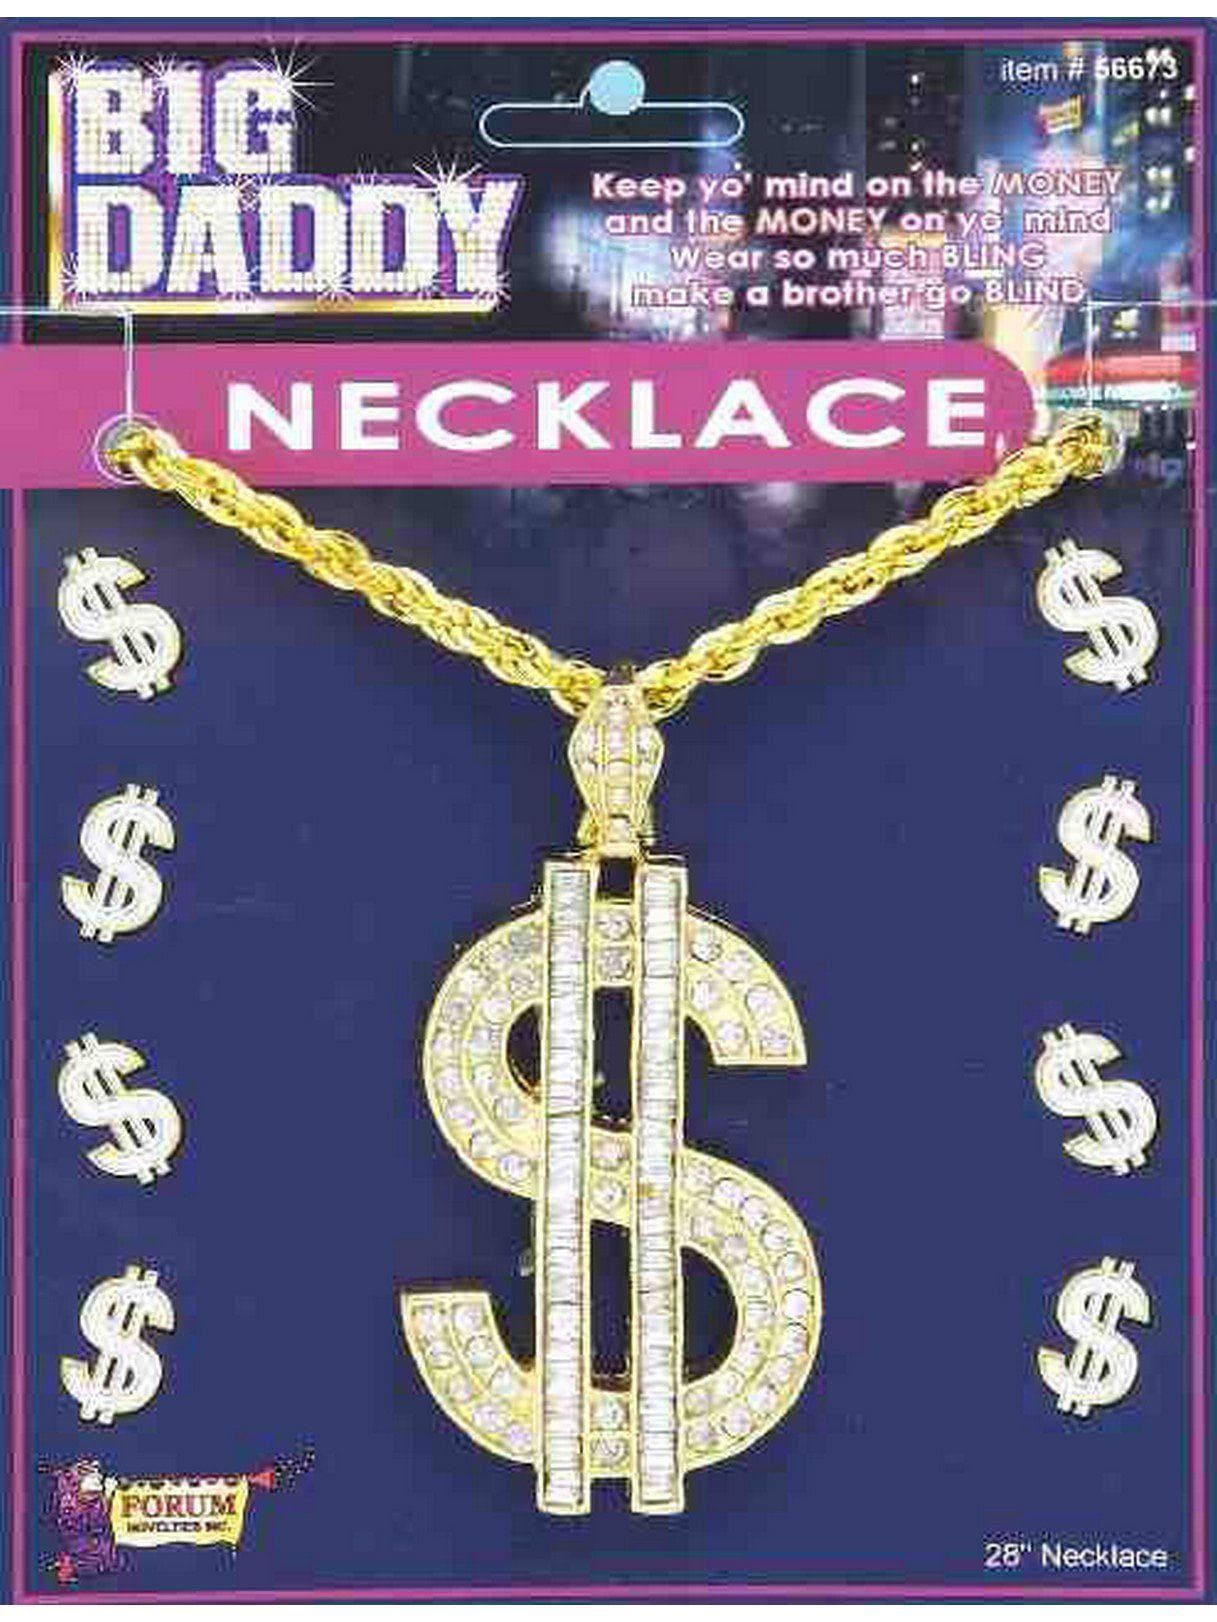 Dollar Sign Big Daddy Necklace - costumes.com